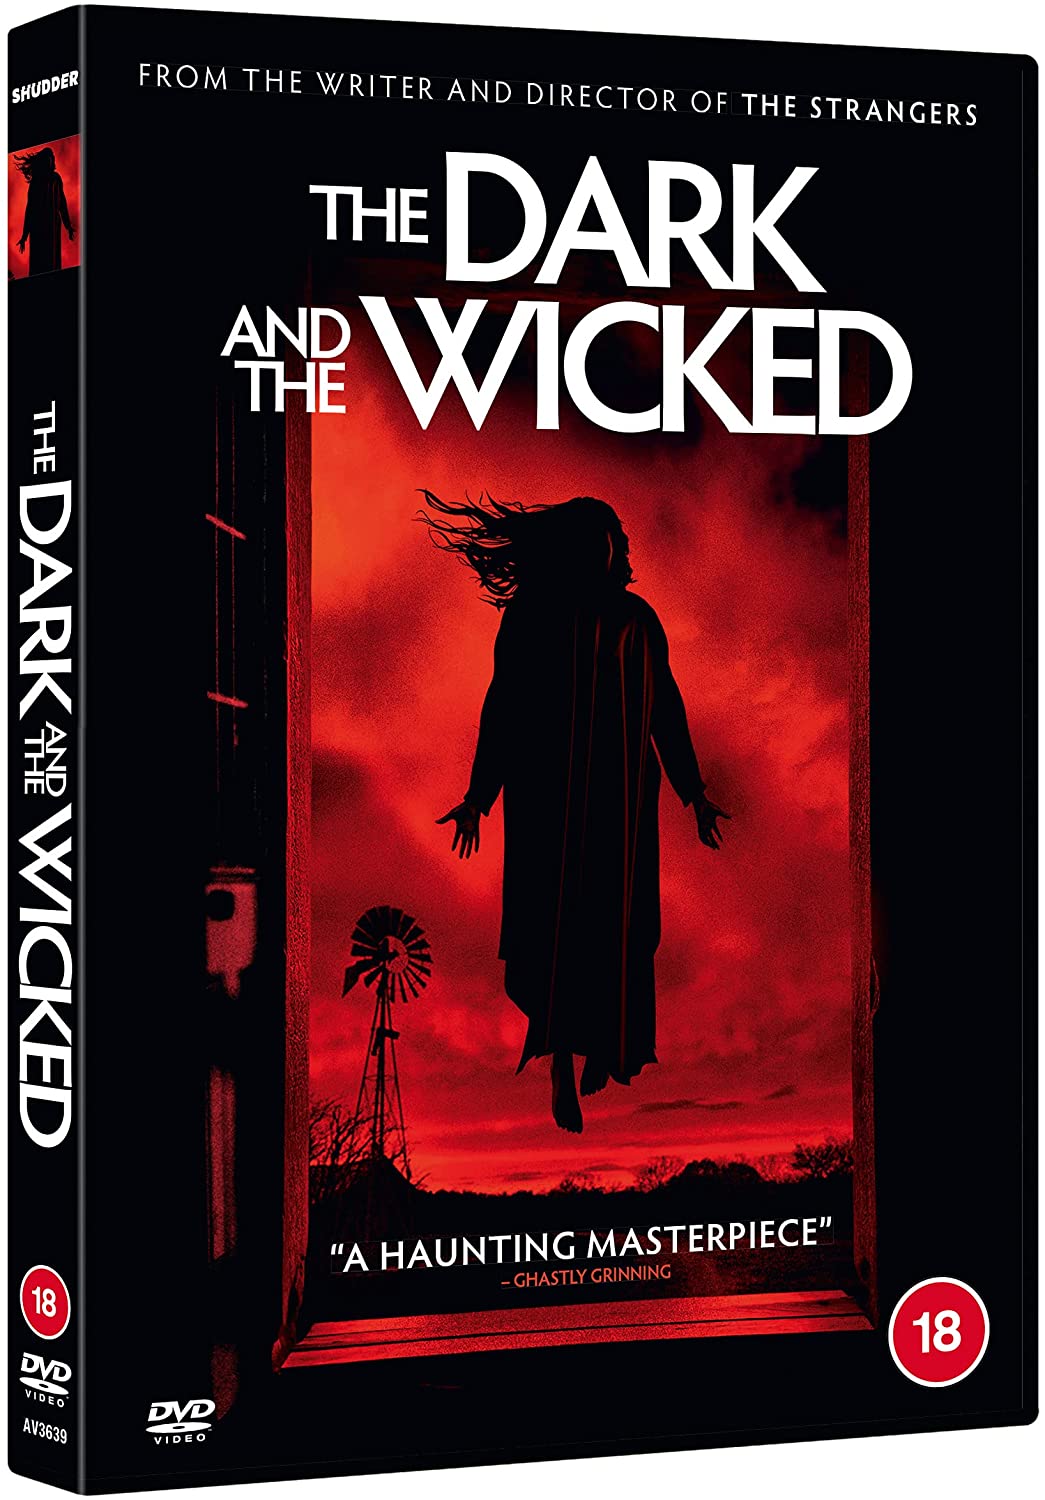 The Dark and the Wicked (SHUDDER) [2020] [DVD]